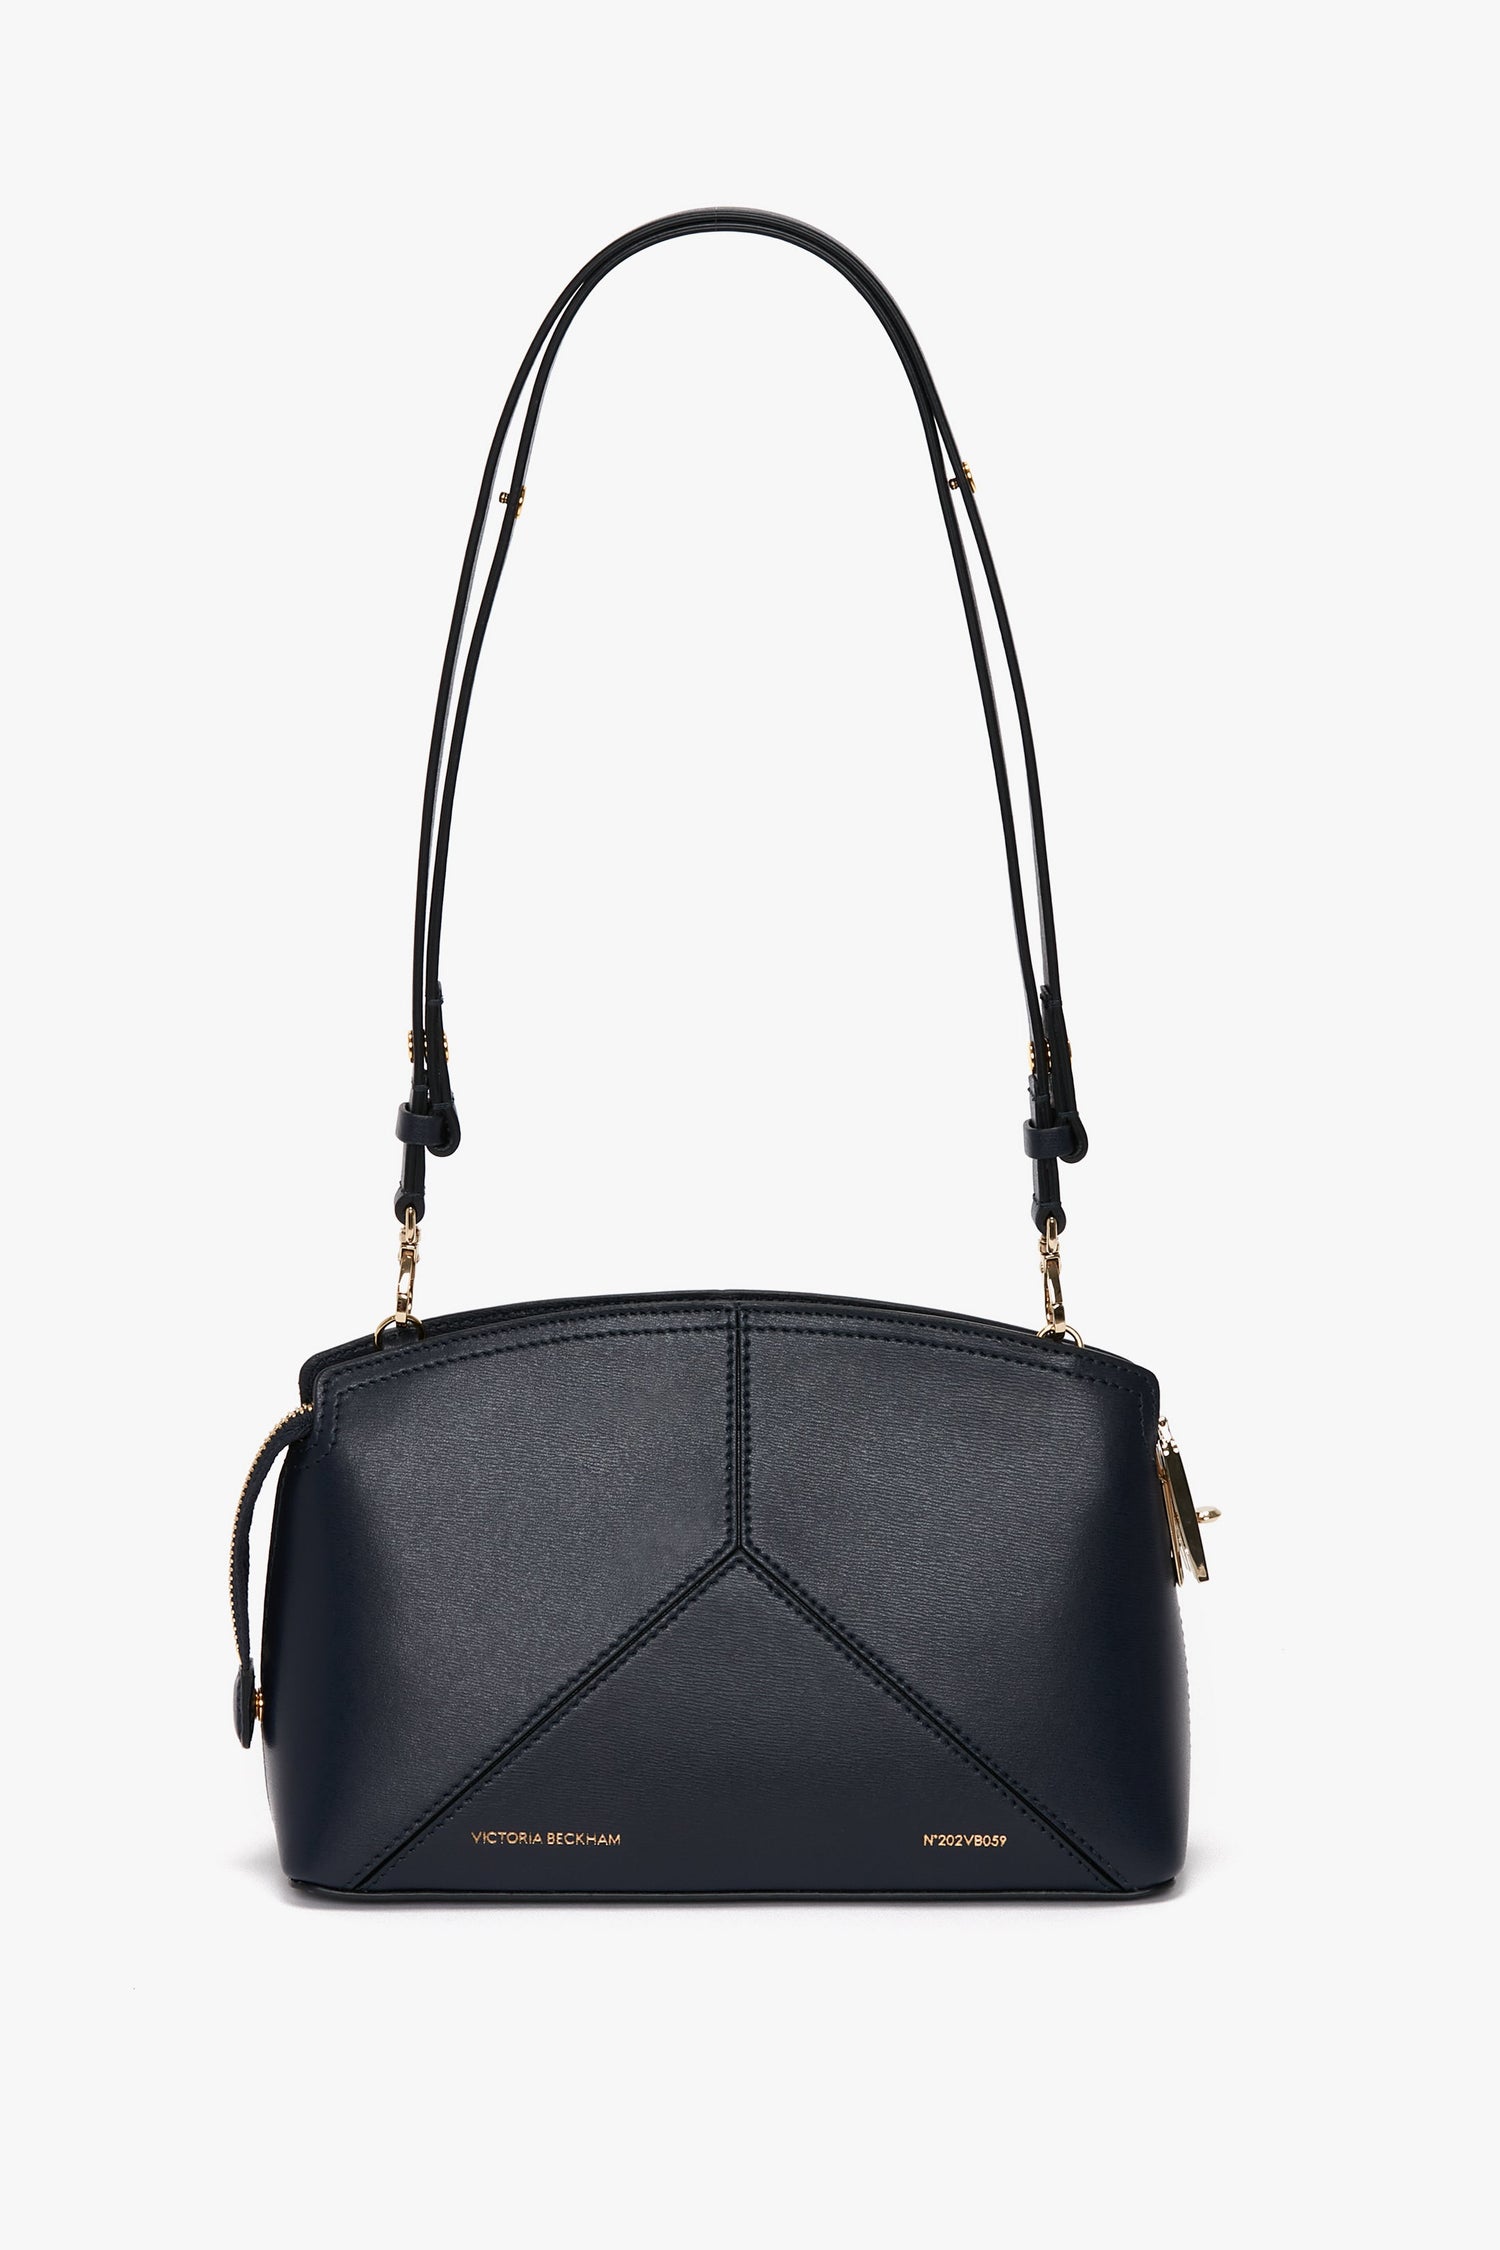 A sleek Exclusive Victoria Crossbody Bag In Navy Leather with gold accents, featuring an adjustable strap and a geometric design, perfect for those who appreciate quality leather goods.